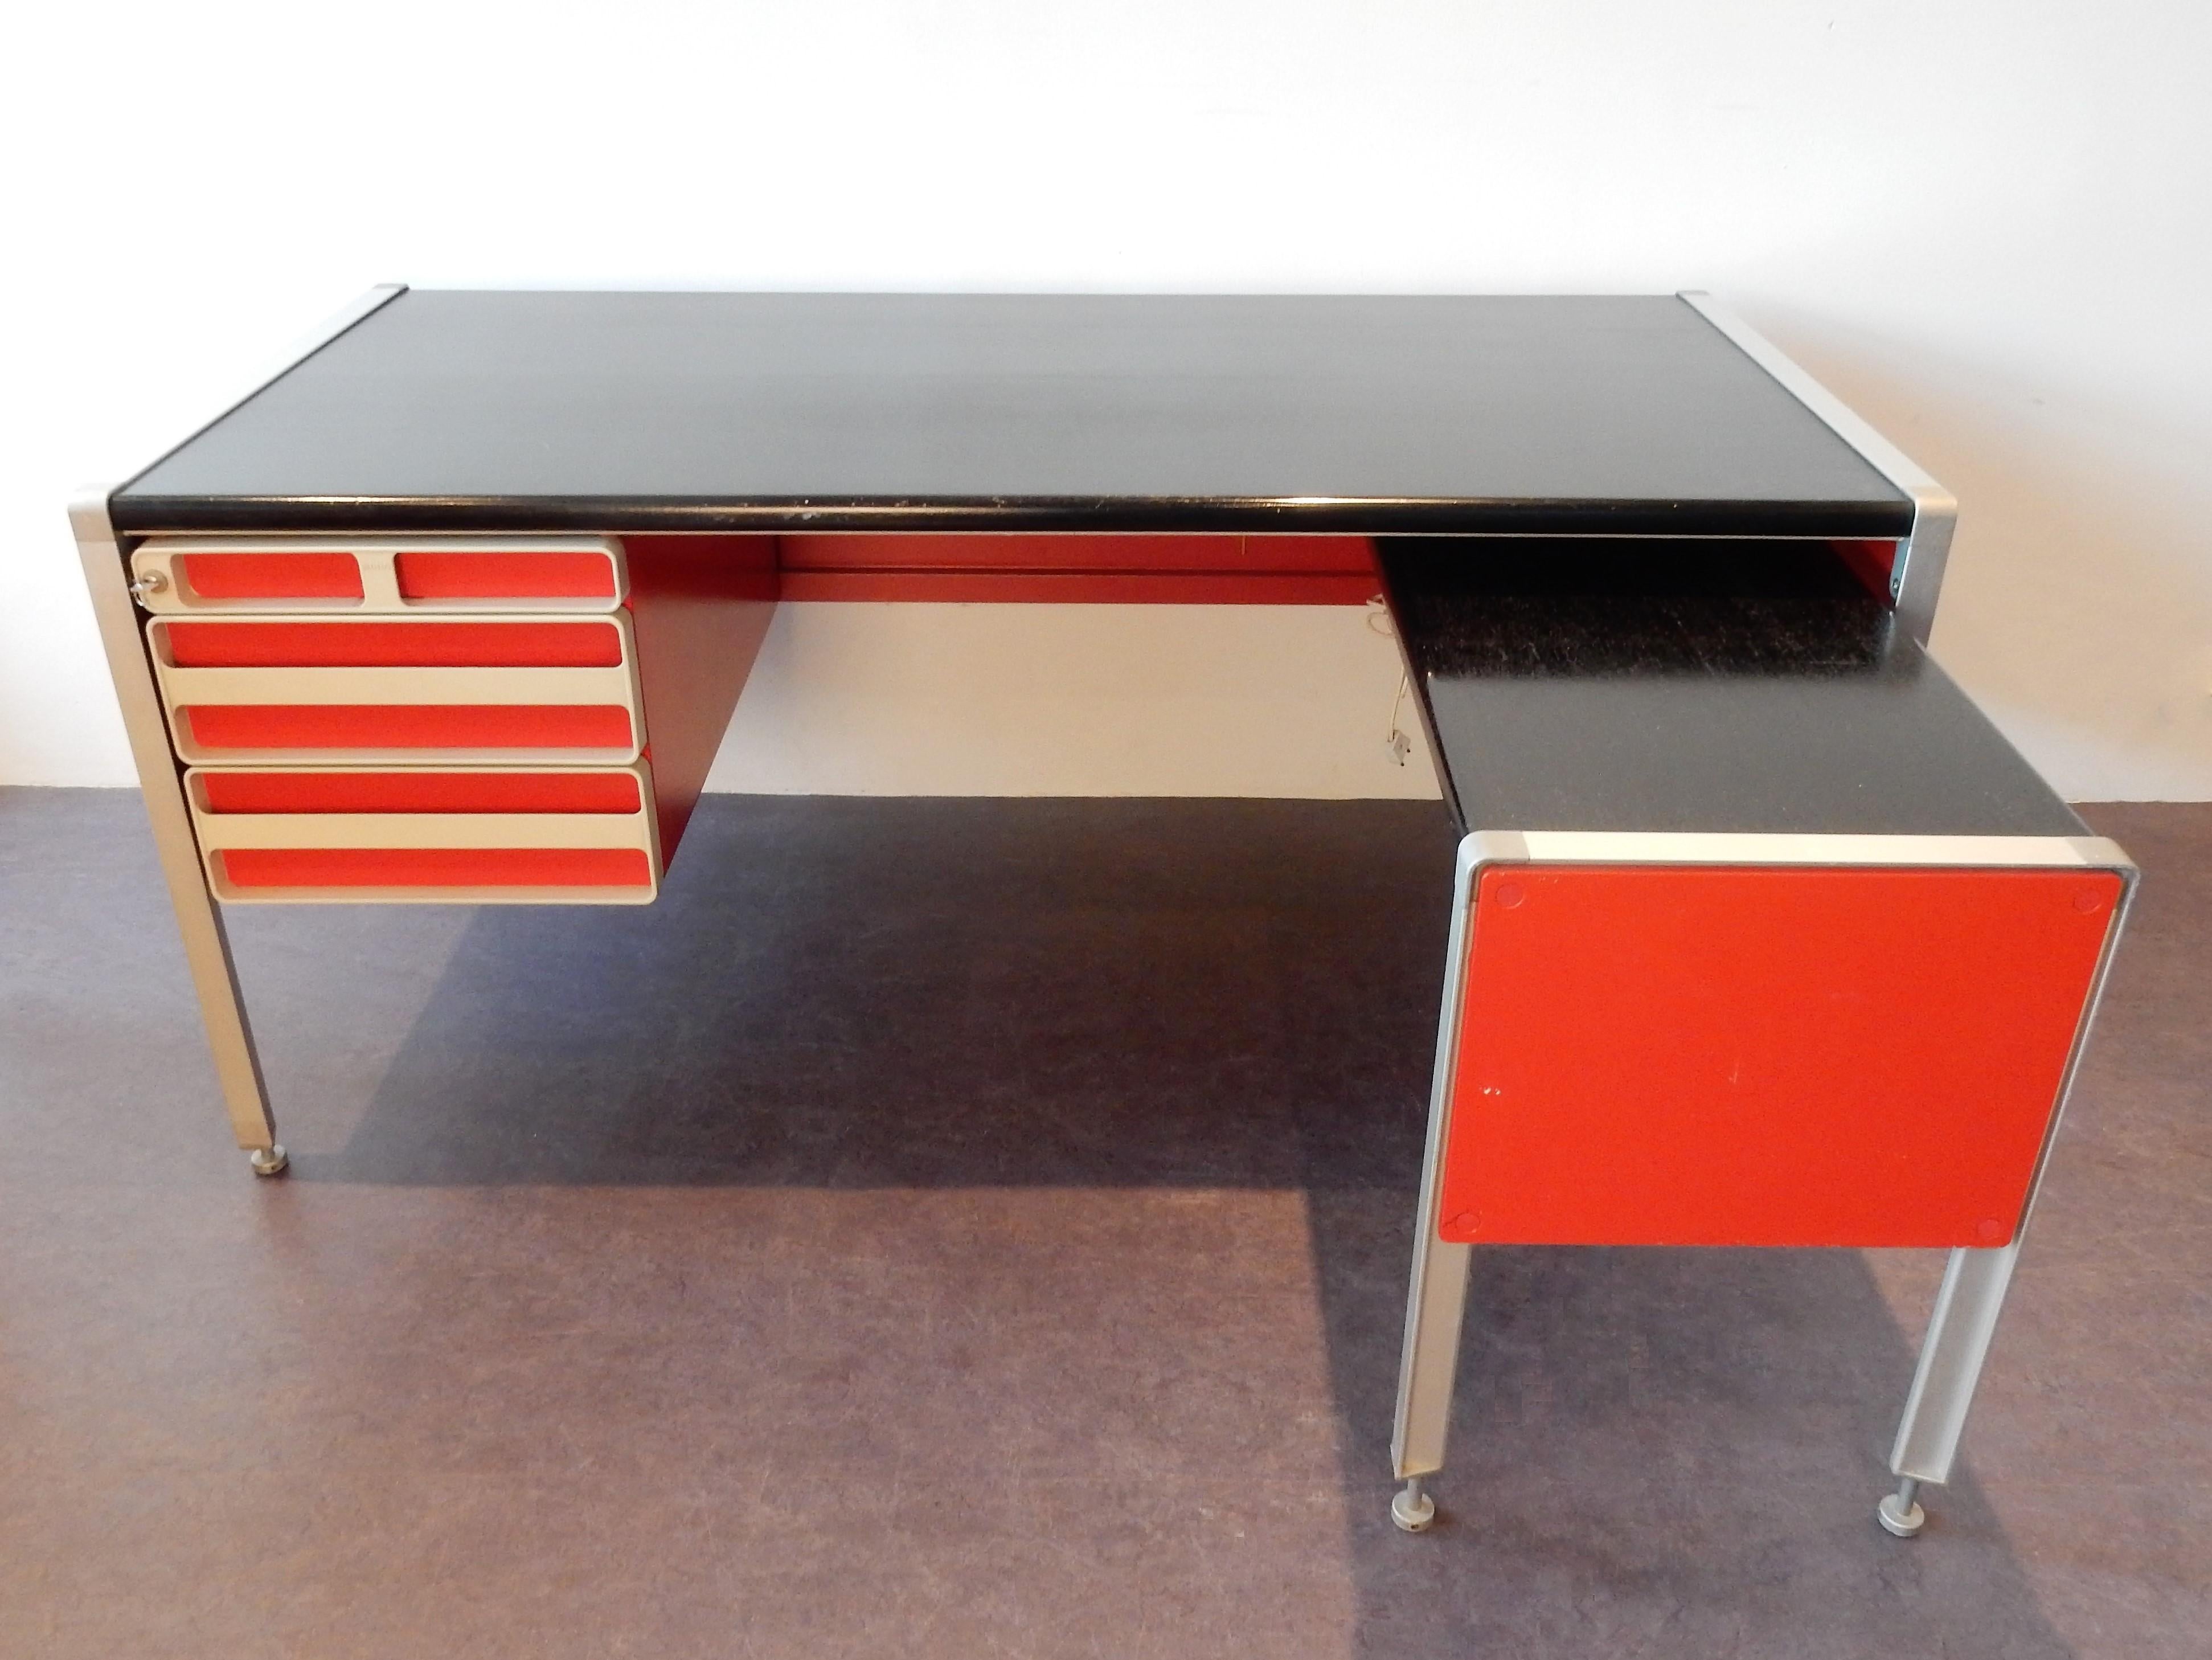 This is a very special desk we have not seen before and we can find very little about. It is marked and produced by the Norwegian company NOBØ. A company that produced award winning office furniture. We did find some information on a design by Arne